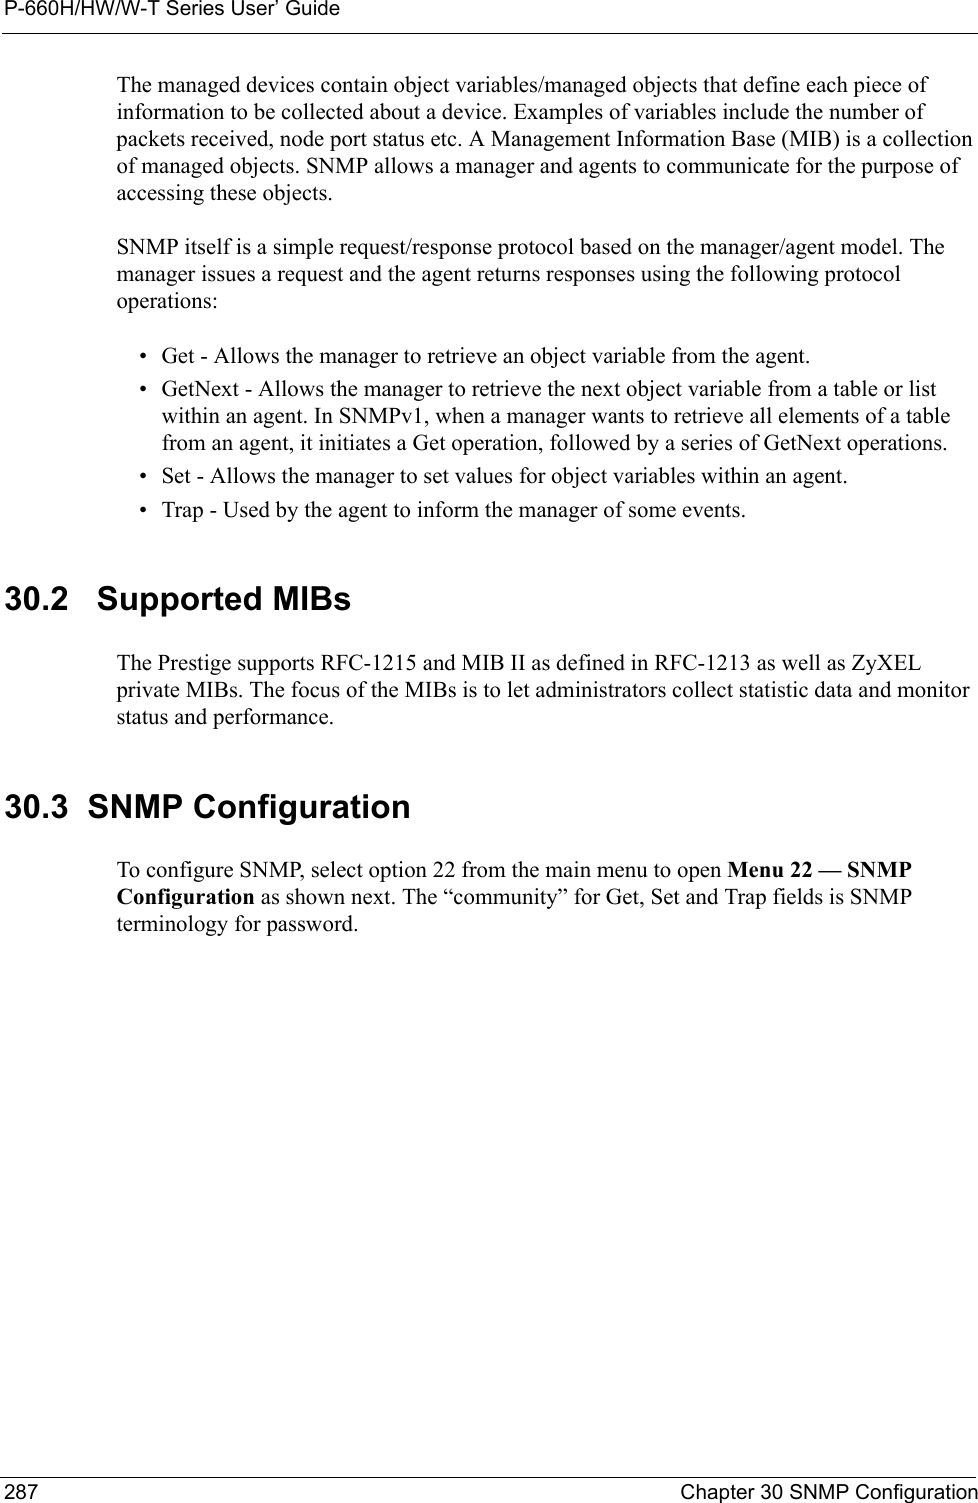 P-660H/HW/W-T Series User’ Guide287 Chapter 30 SNMP ConfigurationThe managed devices contain object variables/managed objects that define each piece of information to be collected about a device. Examples of variables include the number of packets received, node port status etc. A Management Information Base (MIB) is a collection of managed objects. SNMP allows a manager and agents to communicate for the purpose of accessing these objects.SNMP itself is a simple request/response protocol based on the manager/agent model. The manager issues a request and the agent returns responses using the following protocol operations:• Get - Allows the manager to retrieve an object variable from the agent. • GetNext - Allows the manager to retrieve the next object variable from a table or list within an agent. In SNMPv1, when a manager wants to retrieve all elements of a table from an agent, it initiates a Get operation, followed by a series of GetNext operations. • Set - Allows the manager to set values for object variables within an agent. • Trap - Used by the agent to inform the manager of some events.30.2   Supported MIBsThe Prestige supports RFC-1215 and MIB II as defined in RFC-1213 as well as ZyXEL private MIBs. The focus of the MIBs is to let administrators collect statistic data and monitor status and performance.30.3  SNMP ConfigurationTo configure SNMP, select option 22 from the main menu to open Menu 22 — SNMP Configuration as shown next. The “community” for Get, Set and Trap fields is SNMP terminology for password.